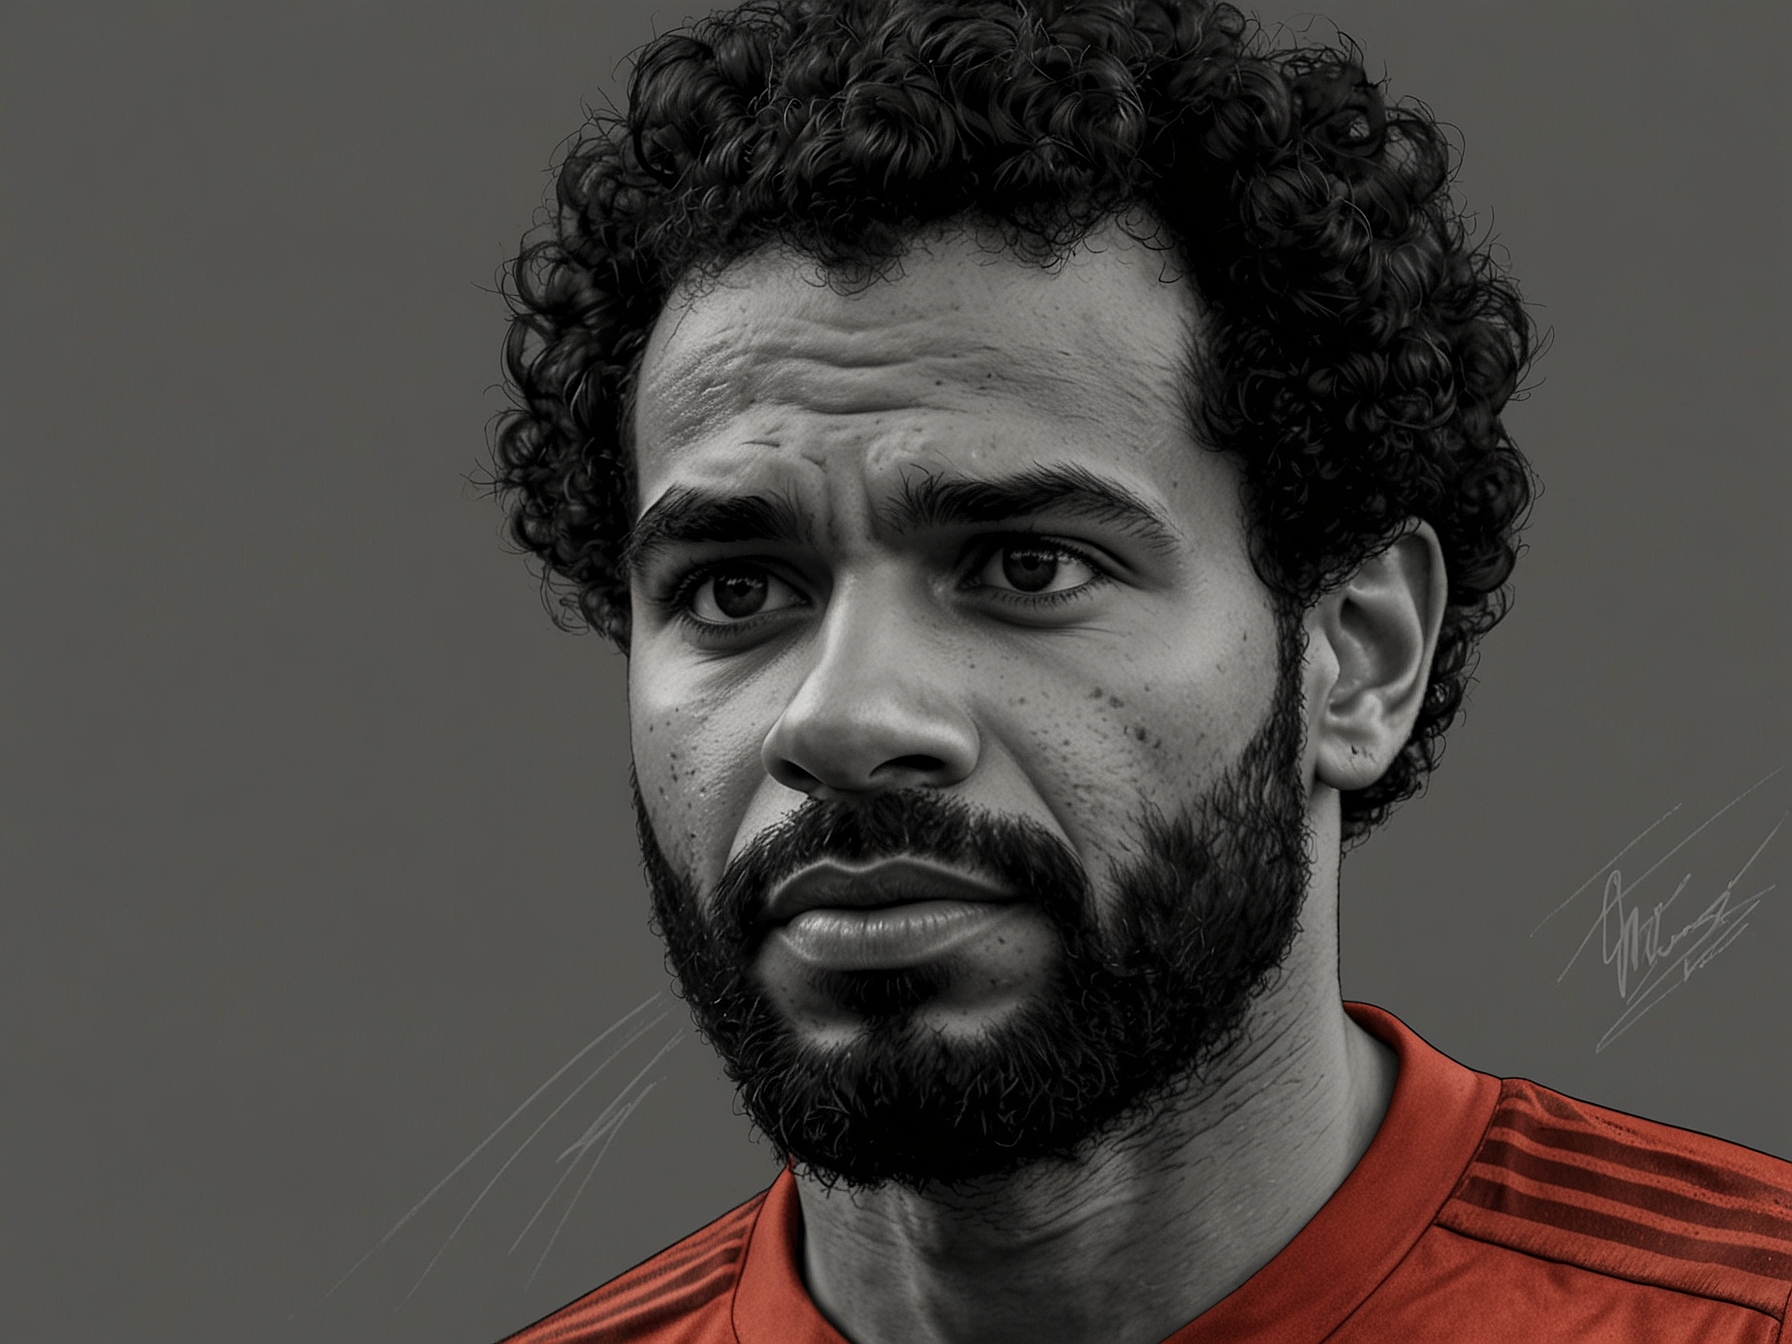 Illustration of Mohamed Salah, highlighting his importance to Liverpool's attack and the potential impact of his departure during the transfer window.